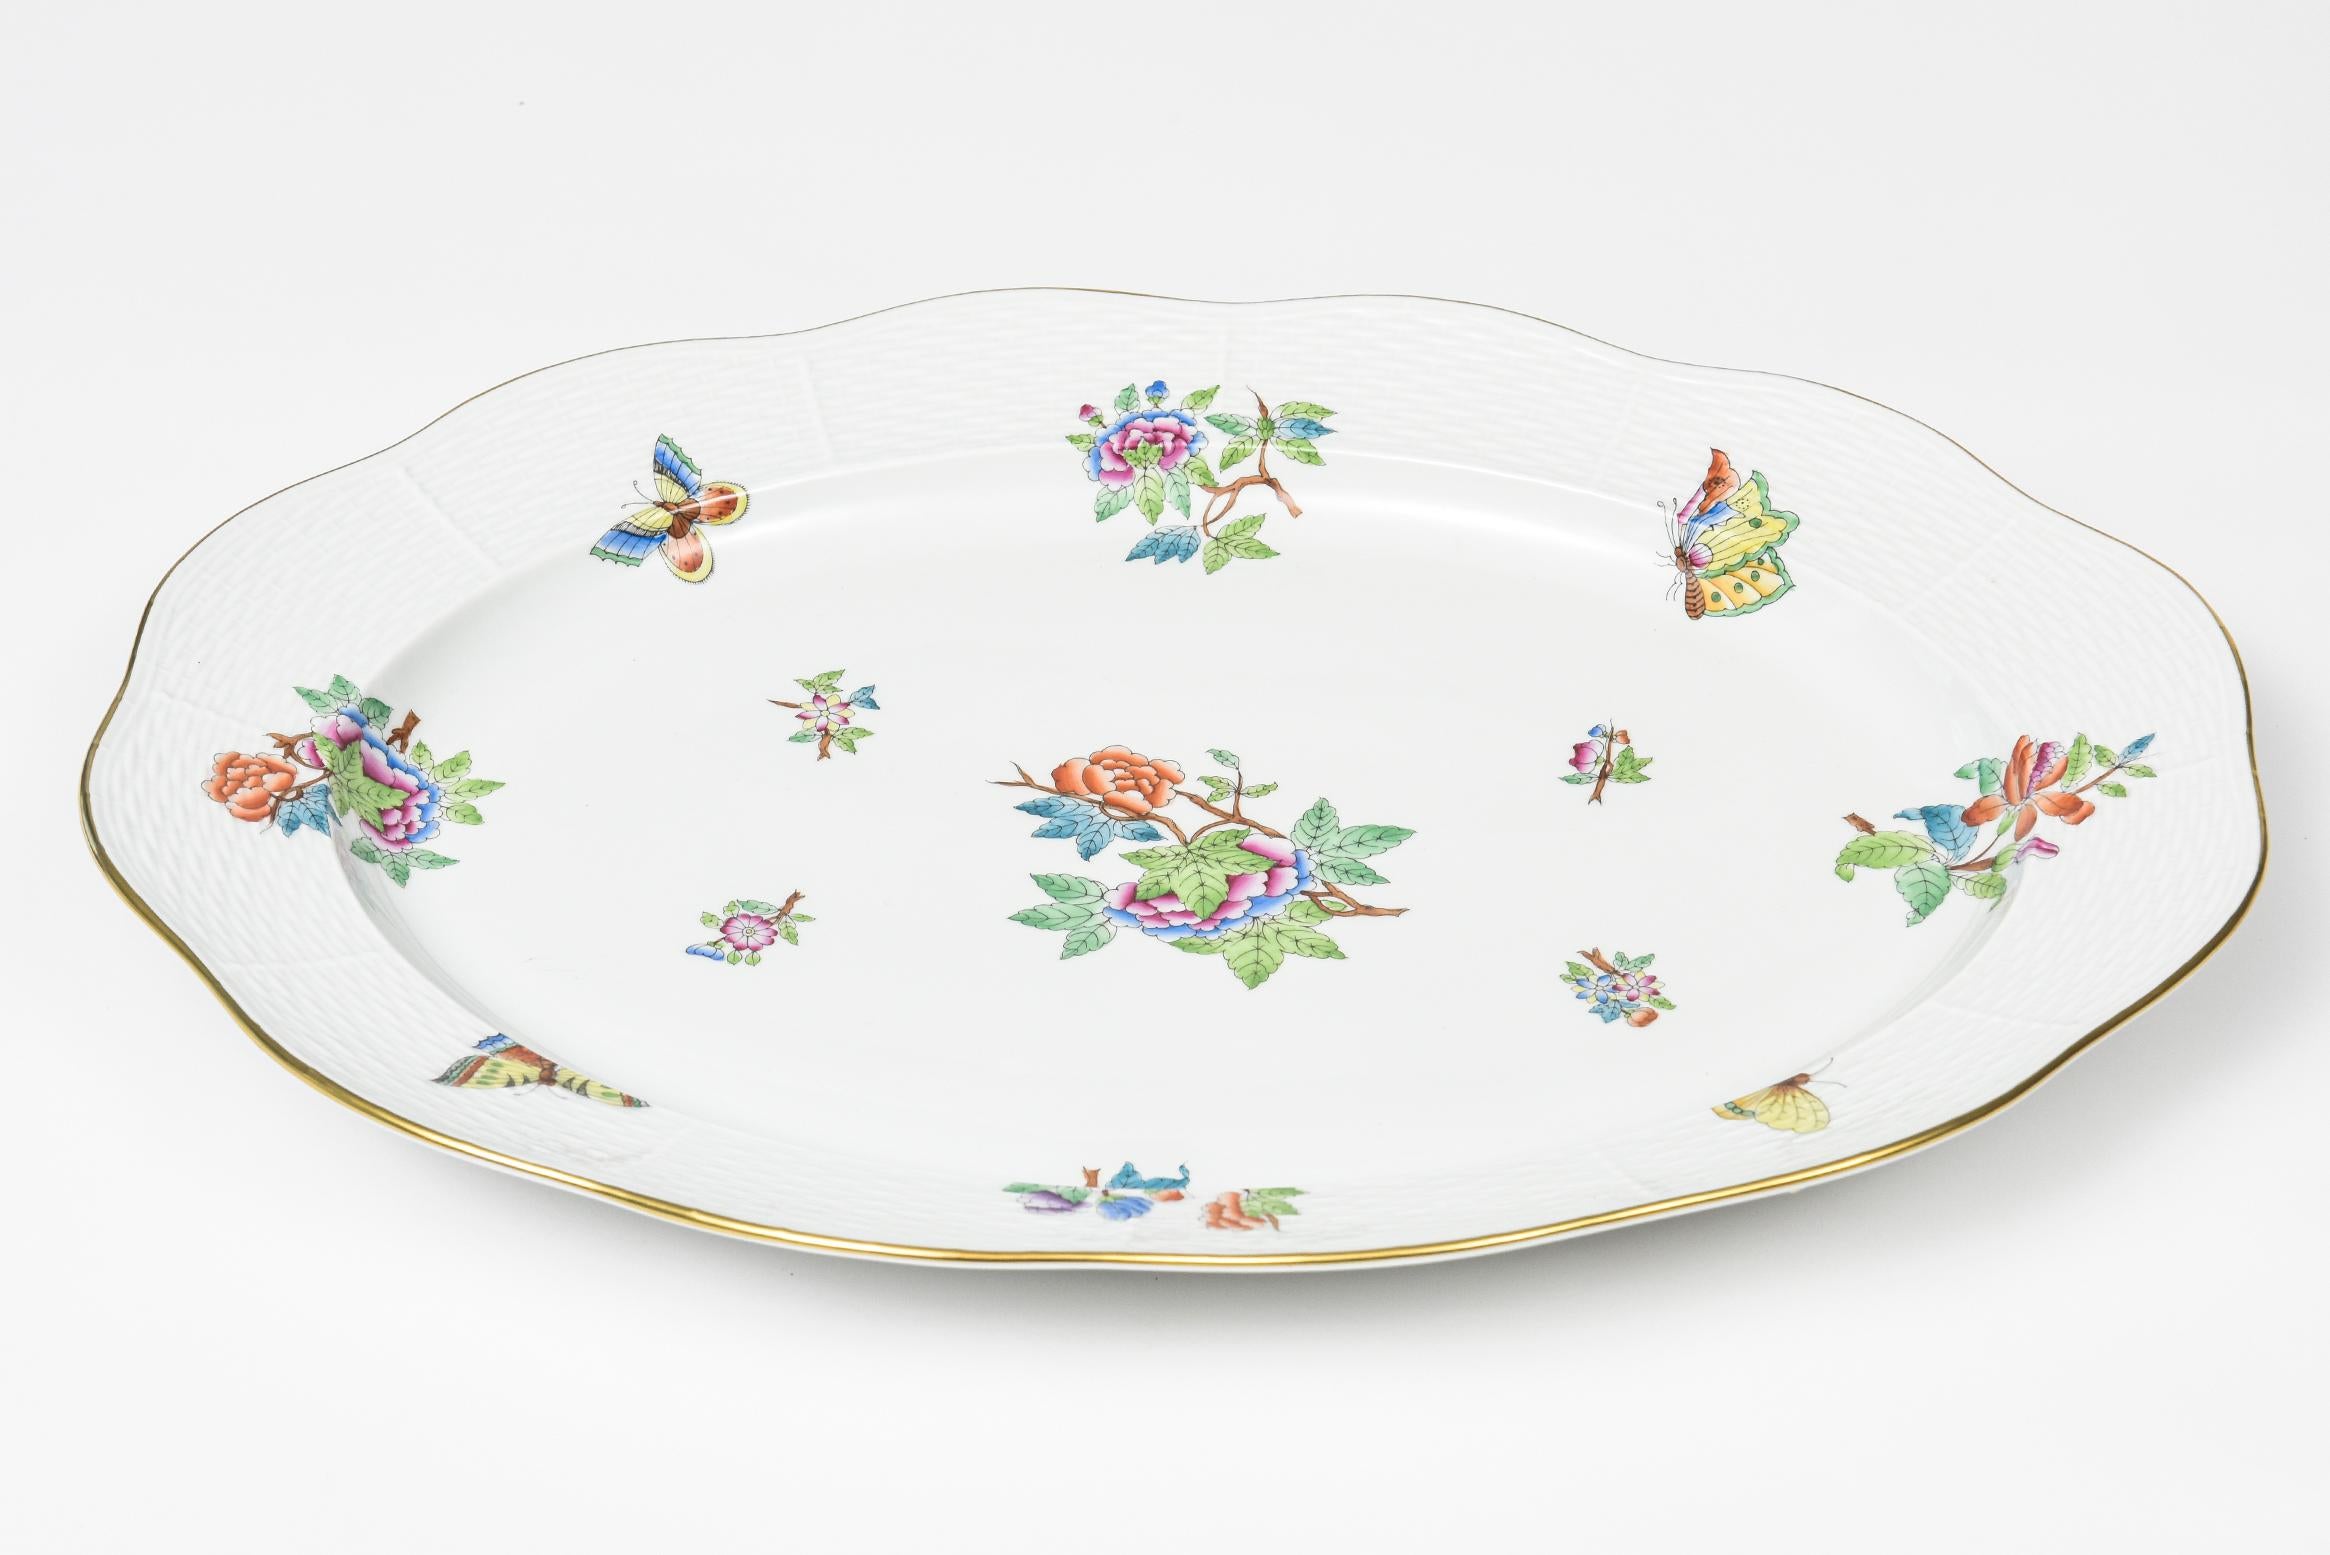 Herend Queen Victoria older oval serving dish platter
The original pattern, introduced in 1851 at the First World Exhibition in London, was purchased by Queen Victoria herself. Subsequently named for her, this Chinese-influenced pattern demands the